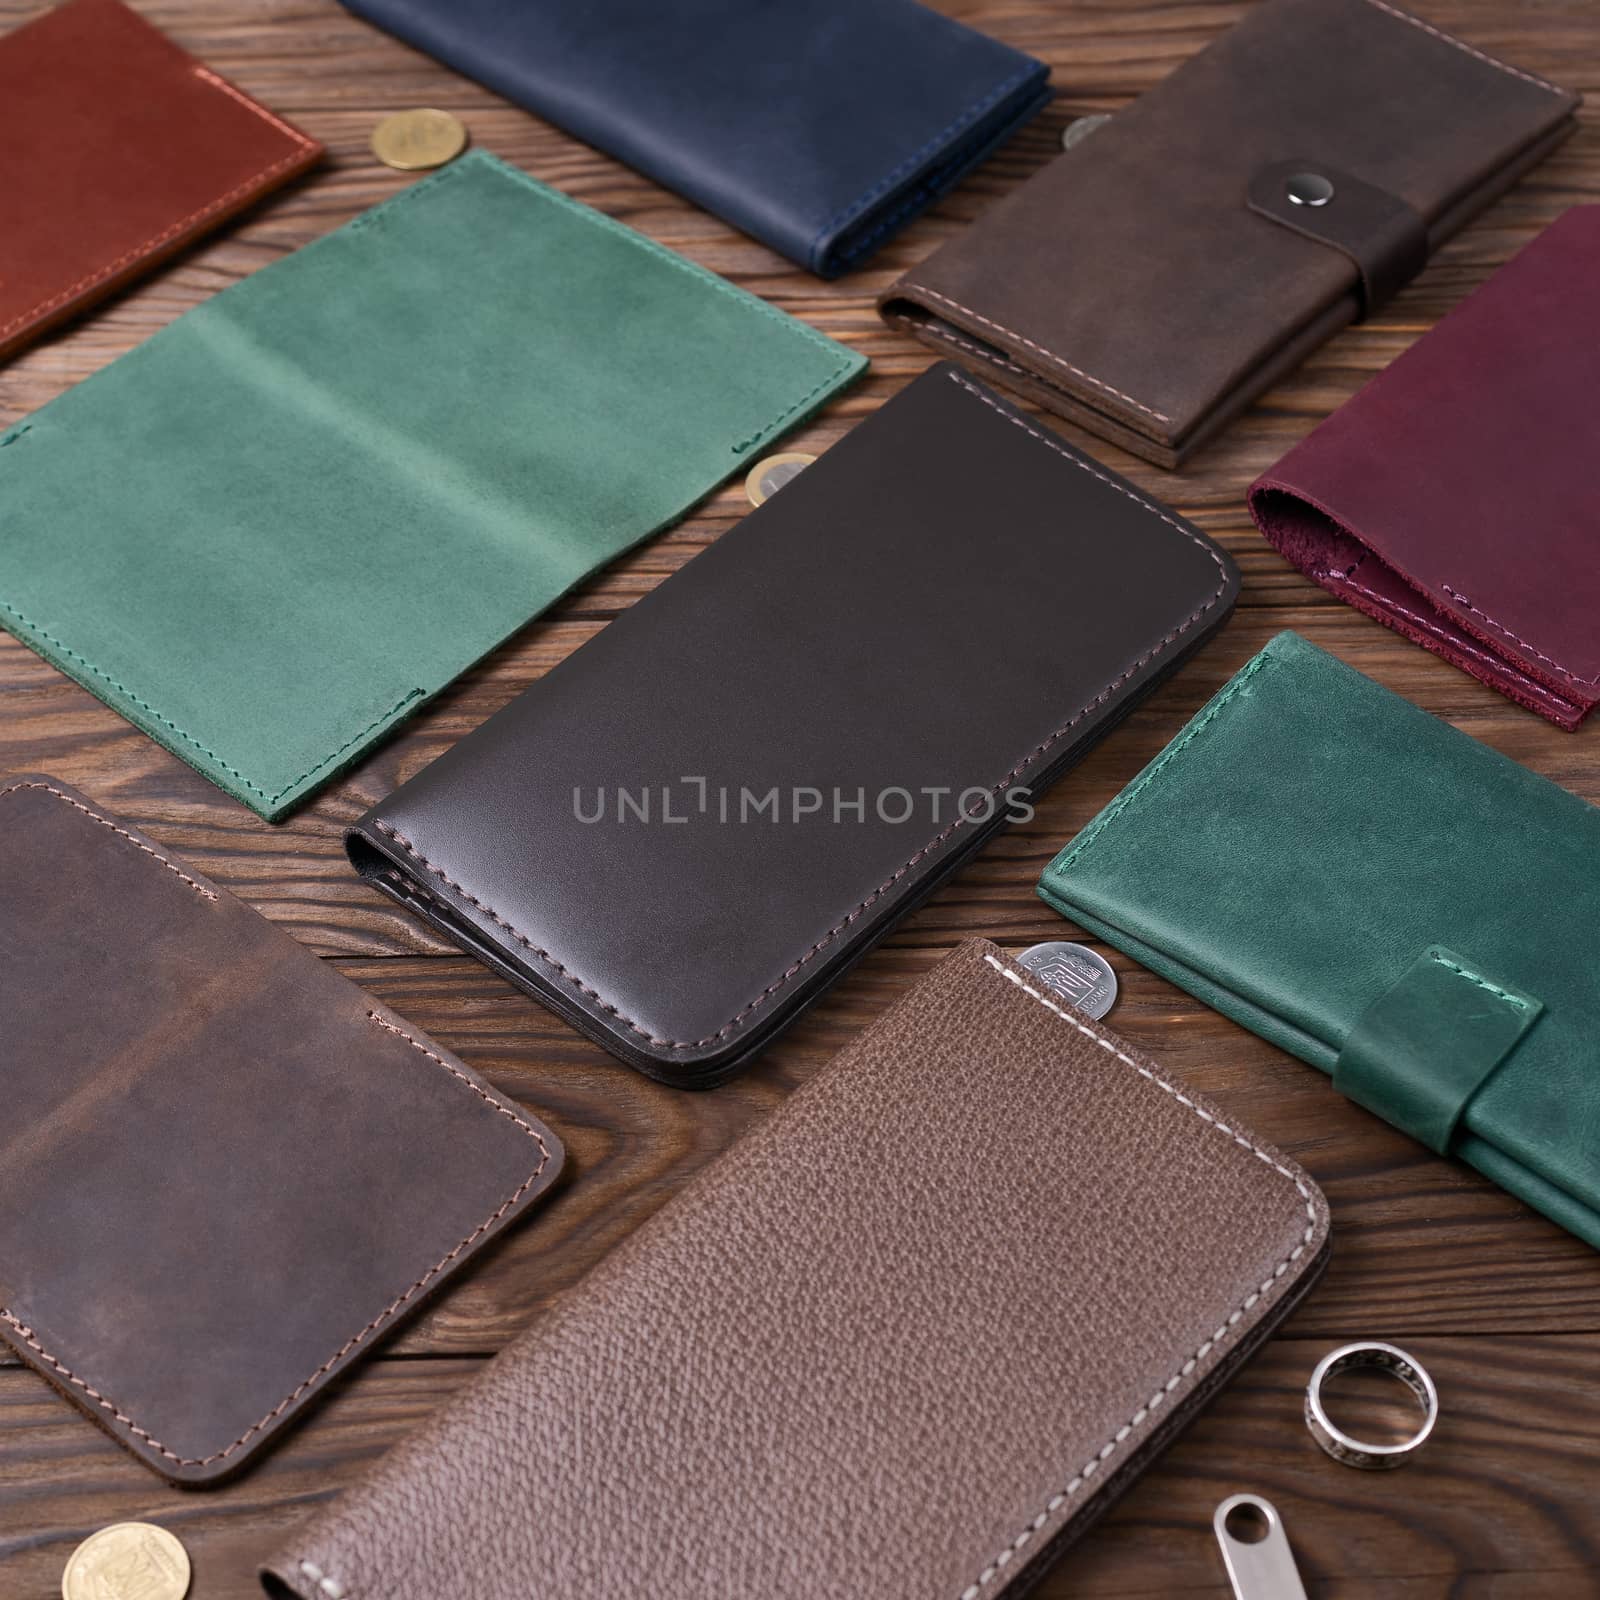 Brown gloss handmade leather porte-monnaie surrounded by other leather accessories on wooden textured background. Side view. Stock photo of luxury accessories. by alexsdriver